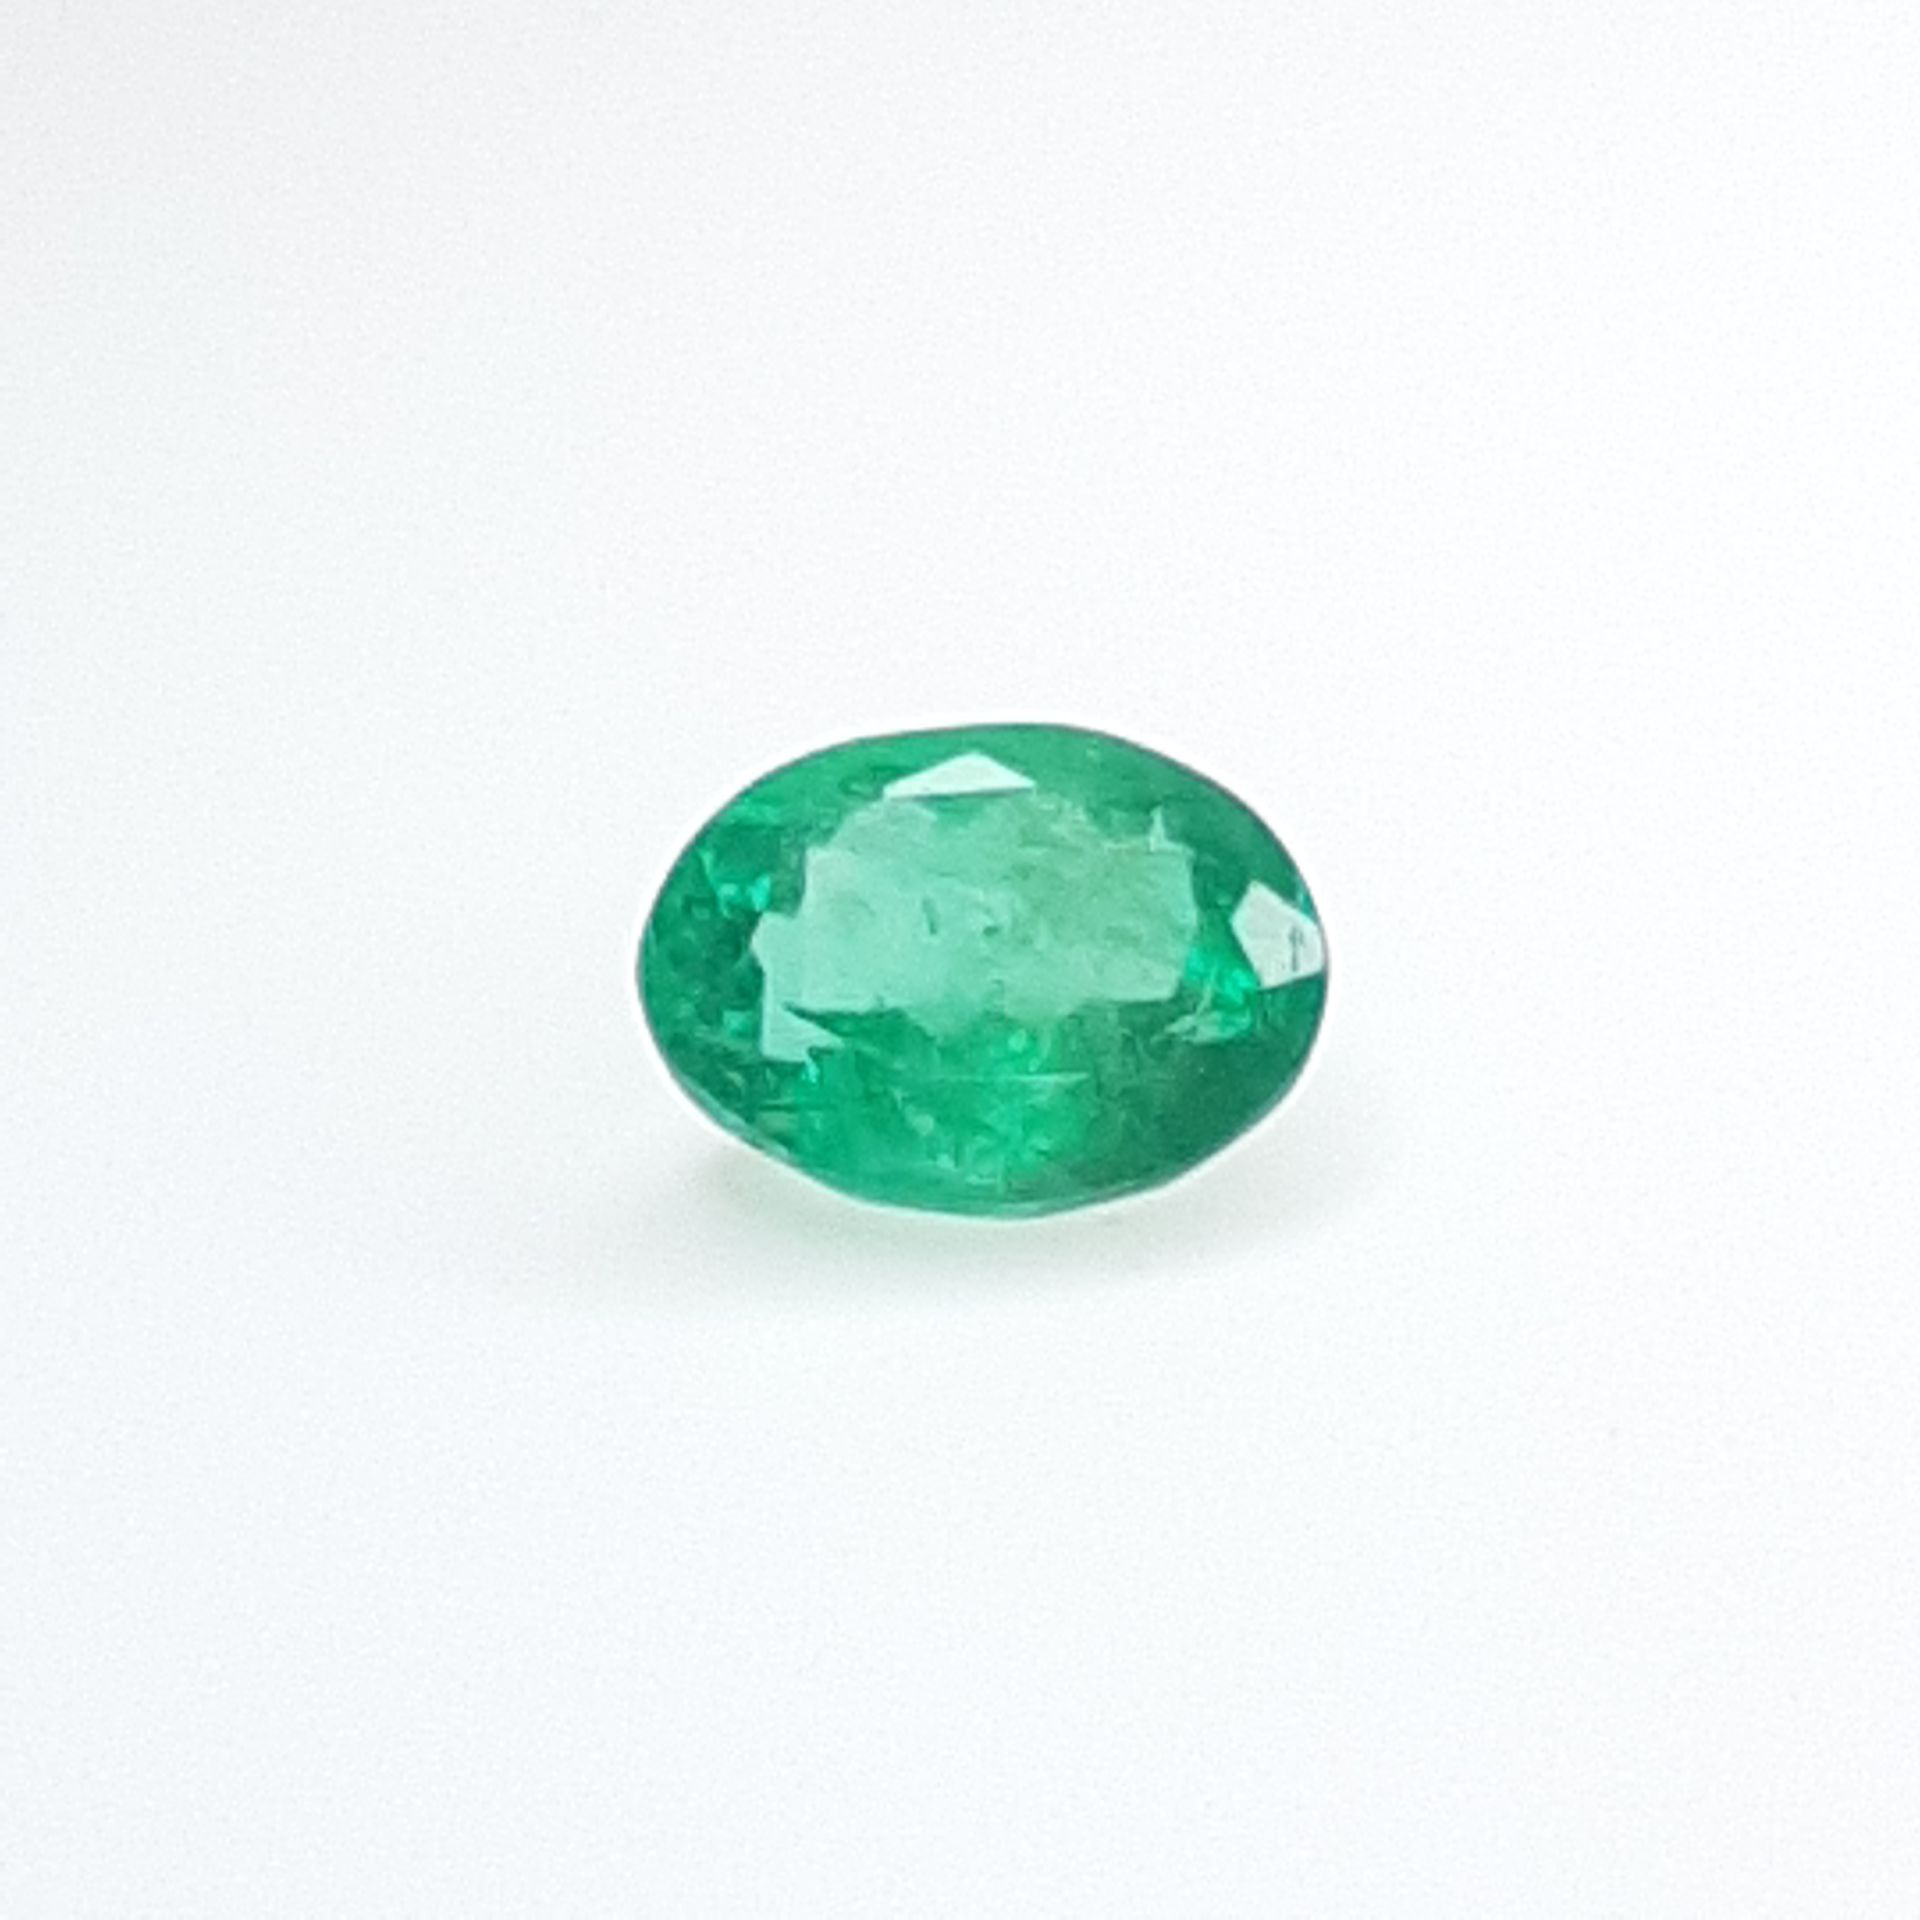 Emeraude - Brésil - 2.35 cts EMERAUD - From Brazil - Green color - Oval size - I&hellip;